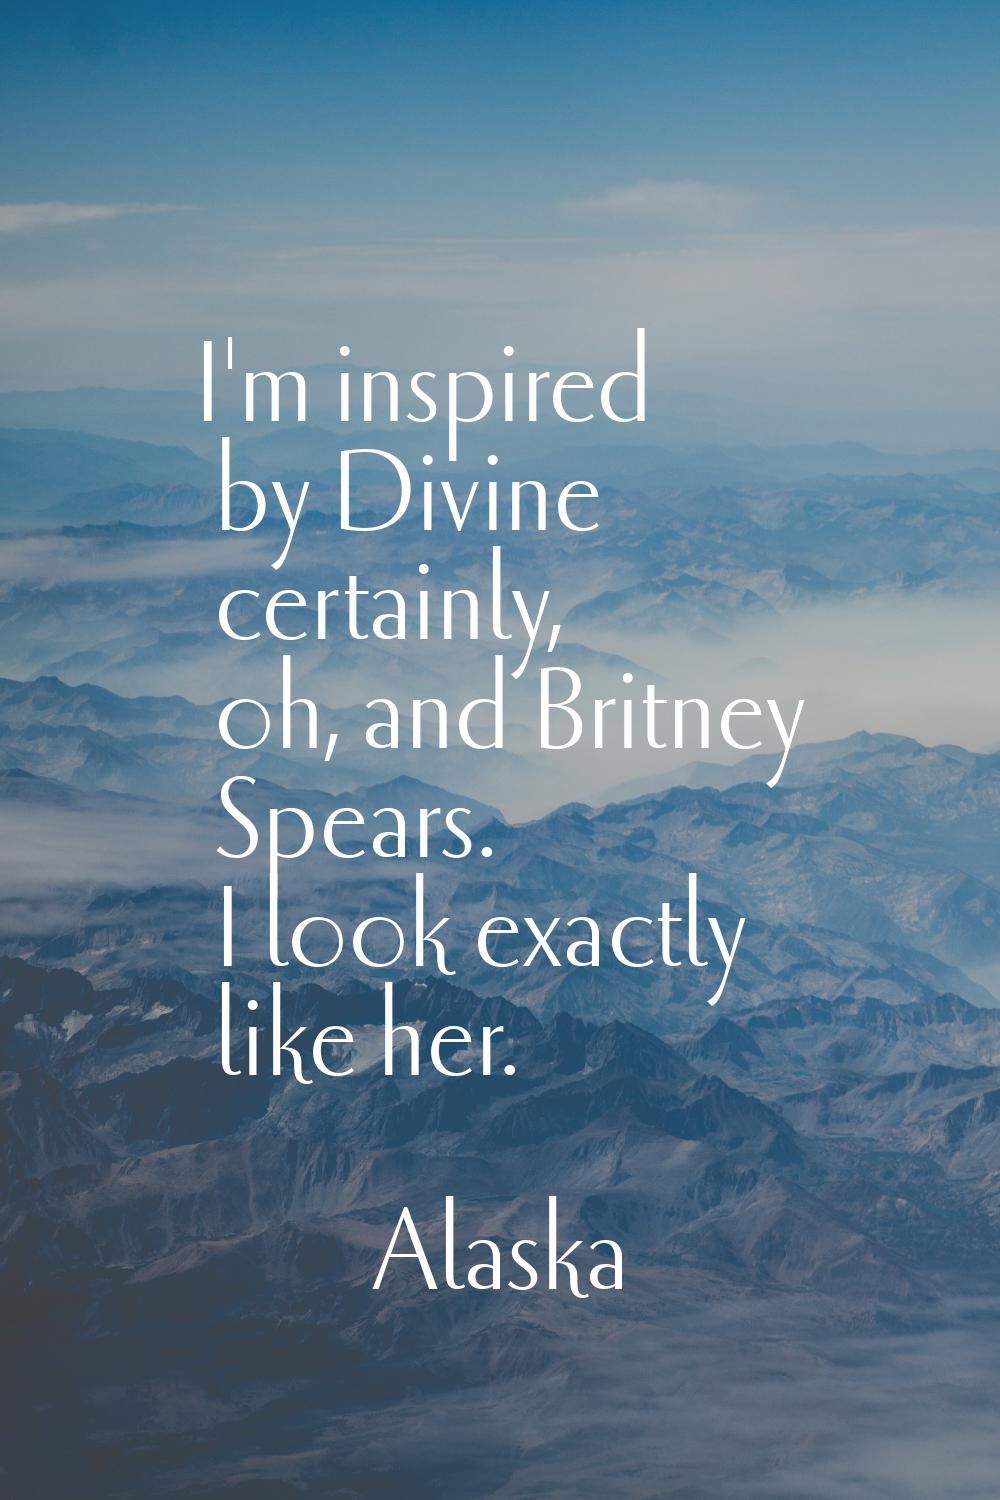 I'm inspired by Divine certainly, oh, and Britney Spears. I look exactly like her.